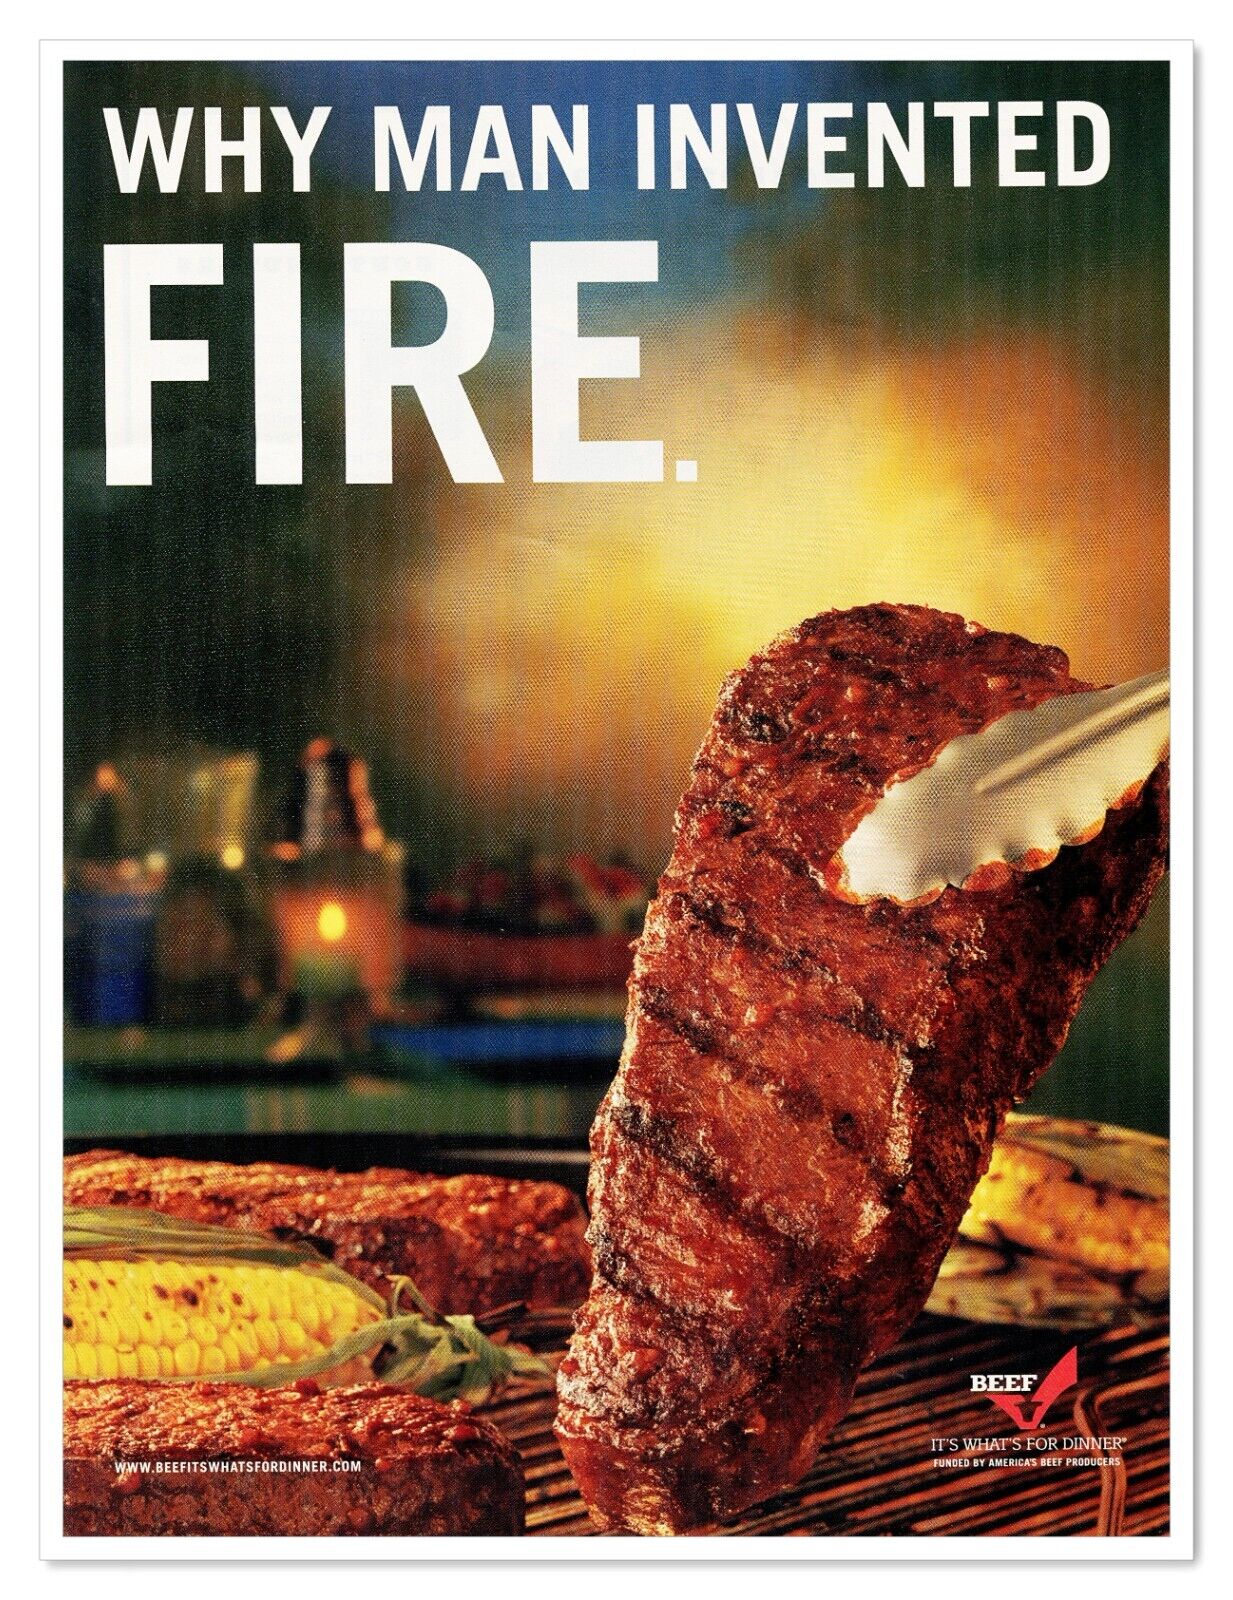 Beef It's What's for Dinner Man Invented Fire 2006 Full-Page Print Magazine Ad